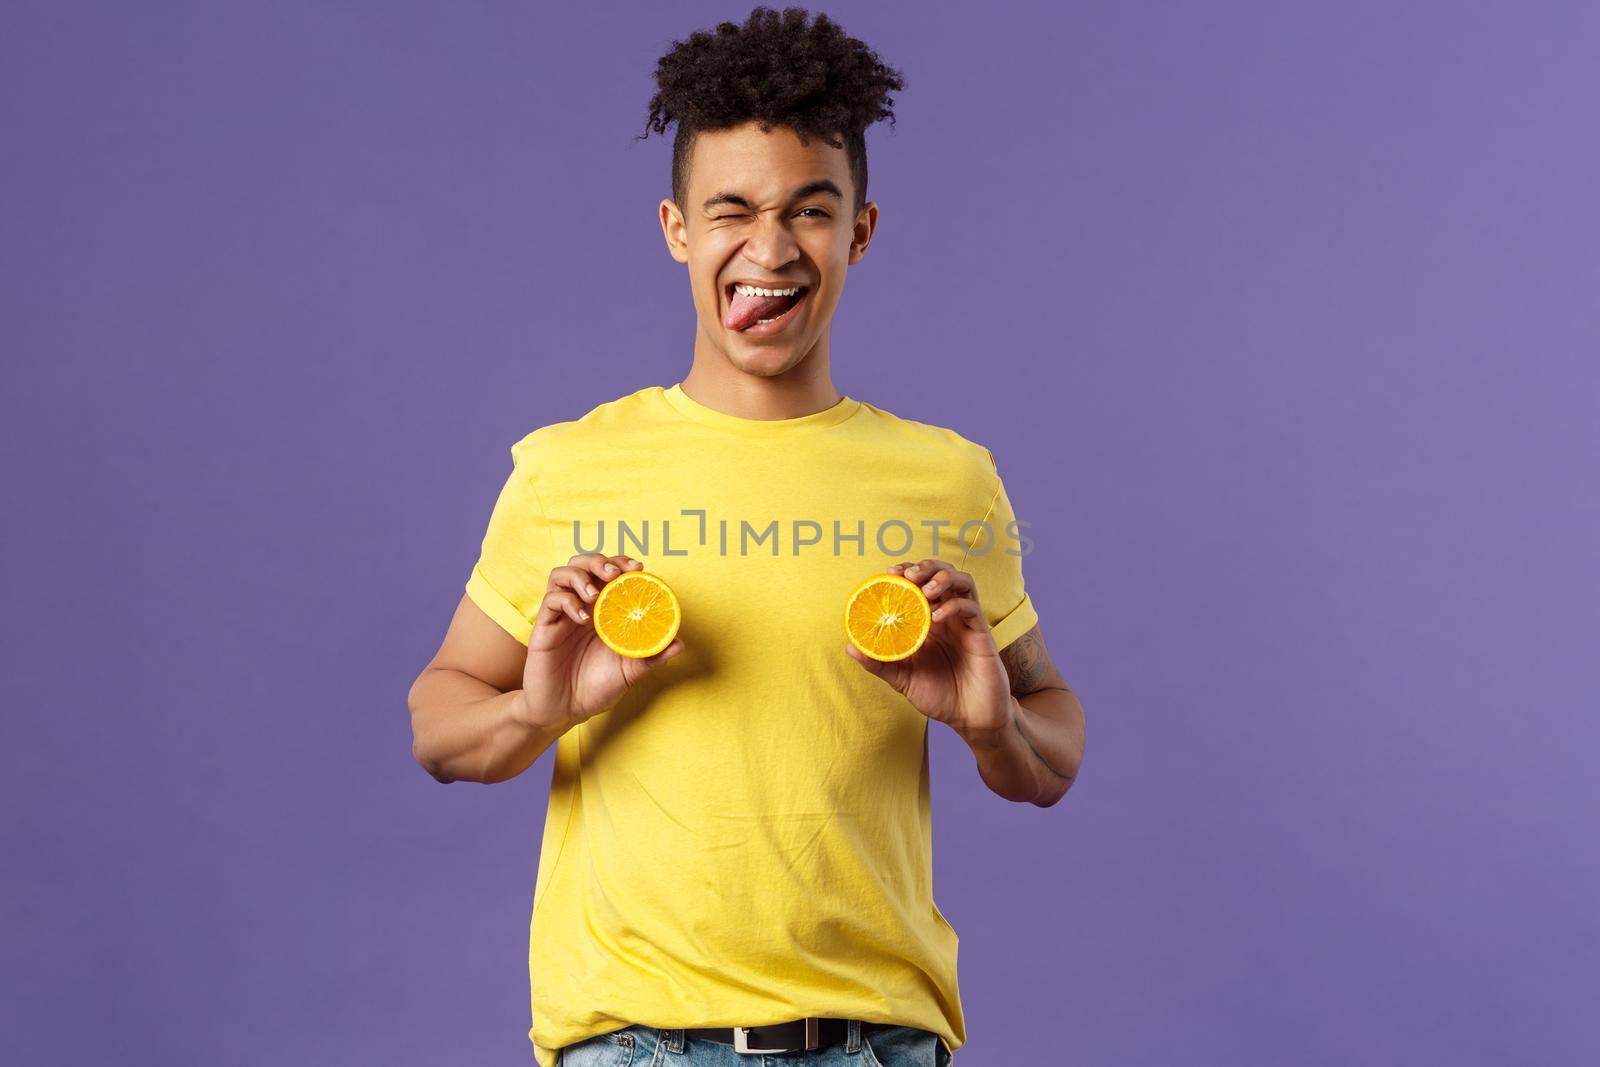 Holidays, vitamins and vacation concept. Portrait of sassy and cheeky funny young playful guy, fool around with fruit, holding pieces of oranges like women breast, show tongue smiling.